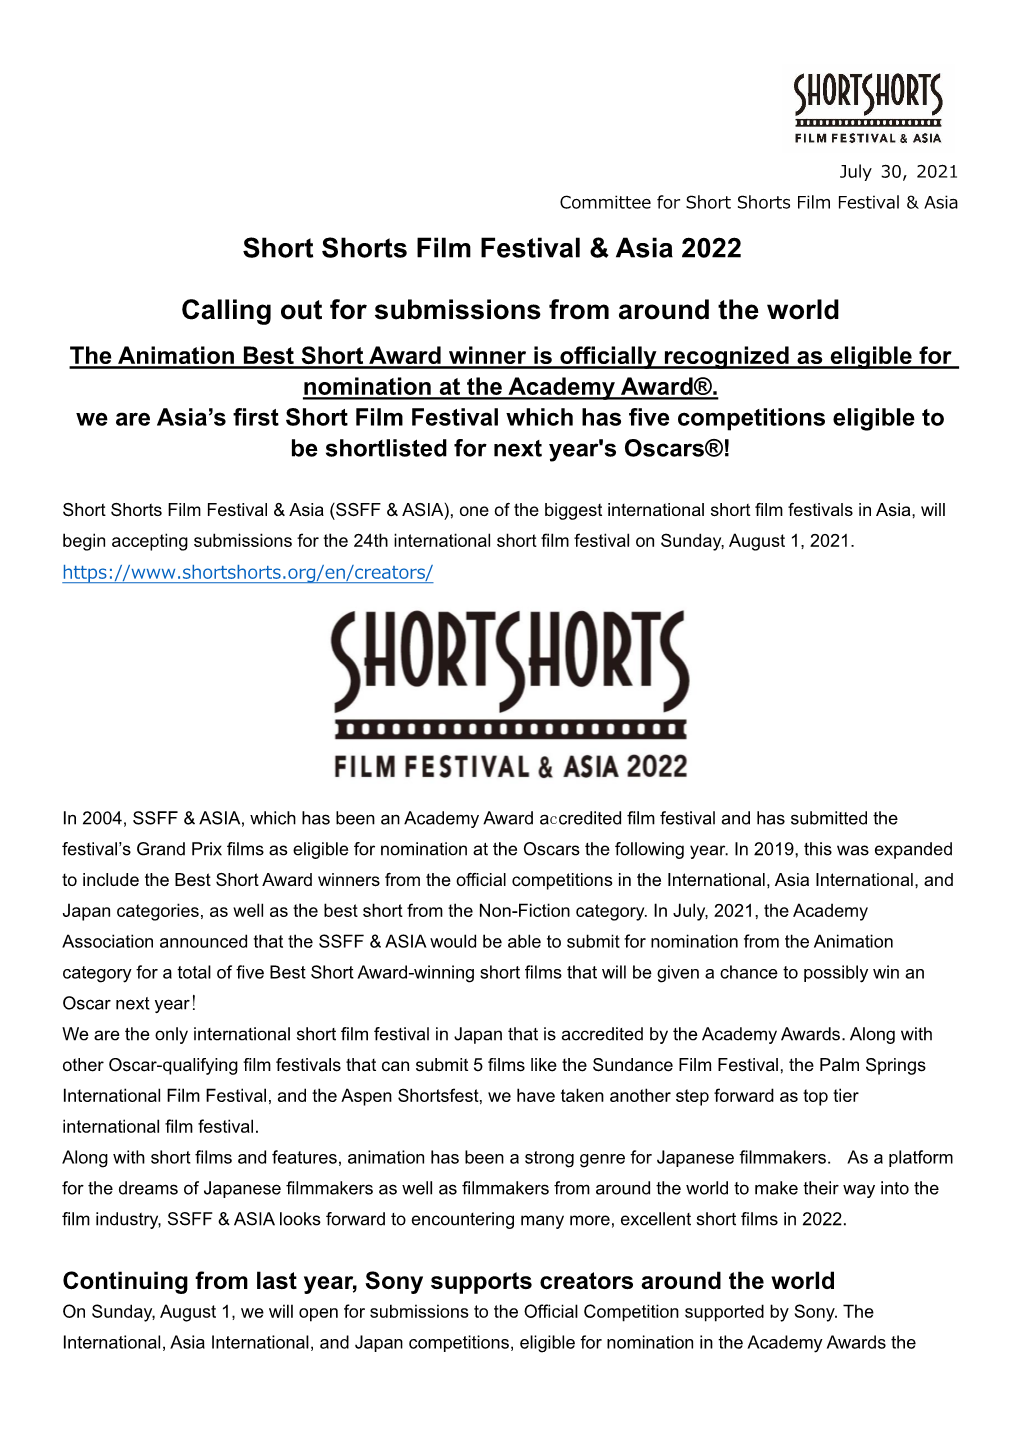 Short Shorts Film Festival & Asia 2022 Calling out for Submissions From